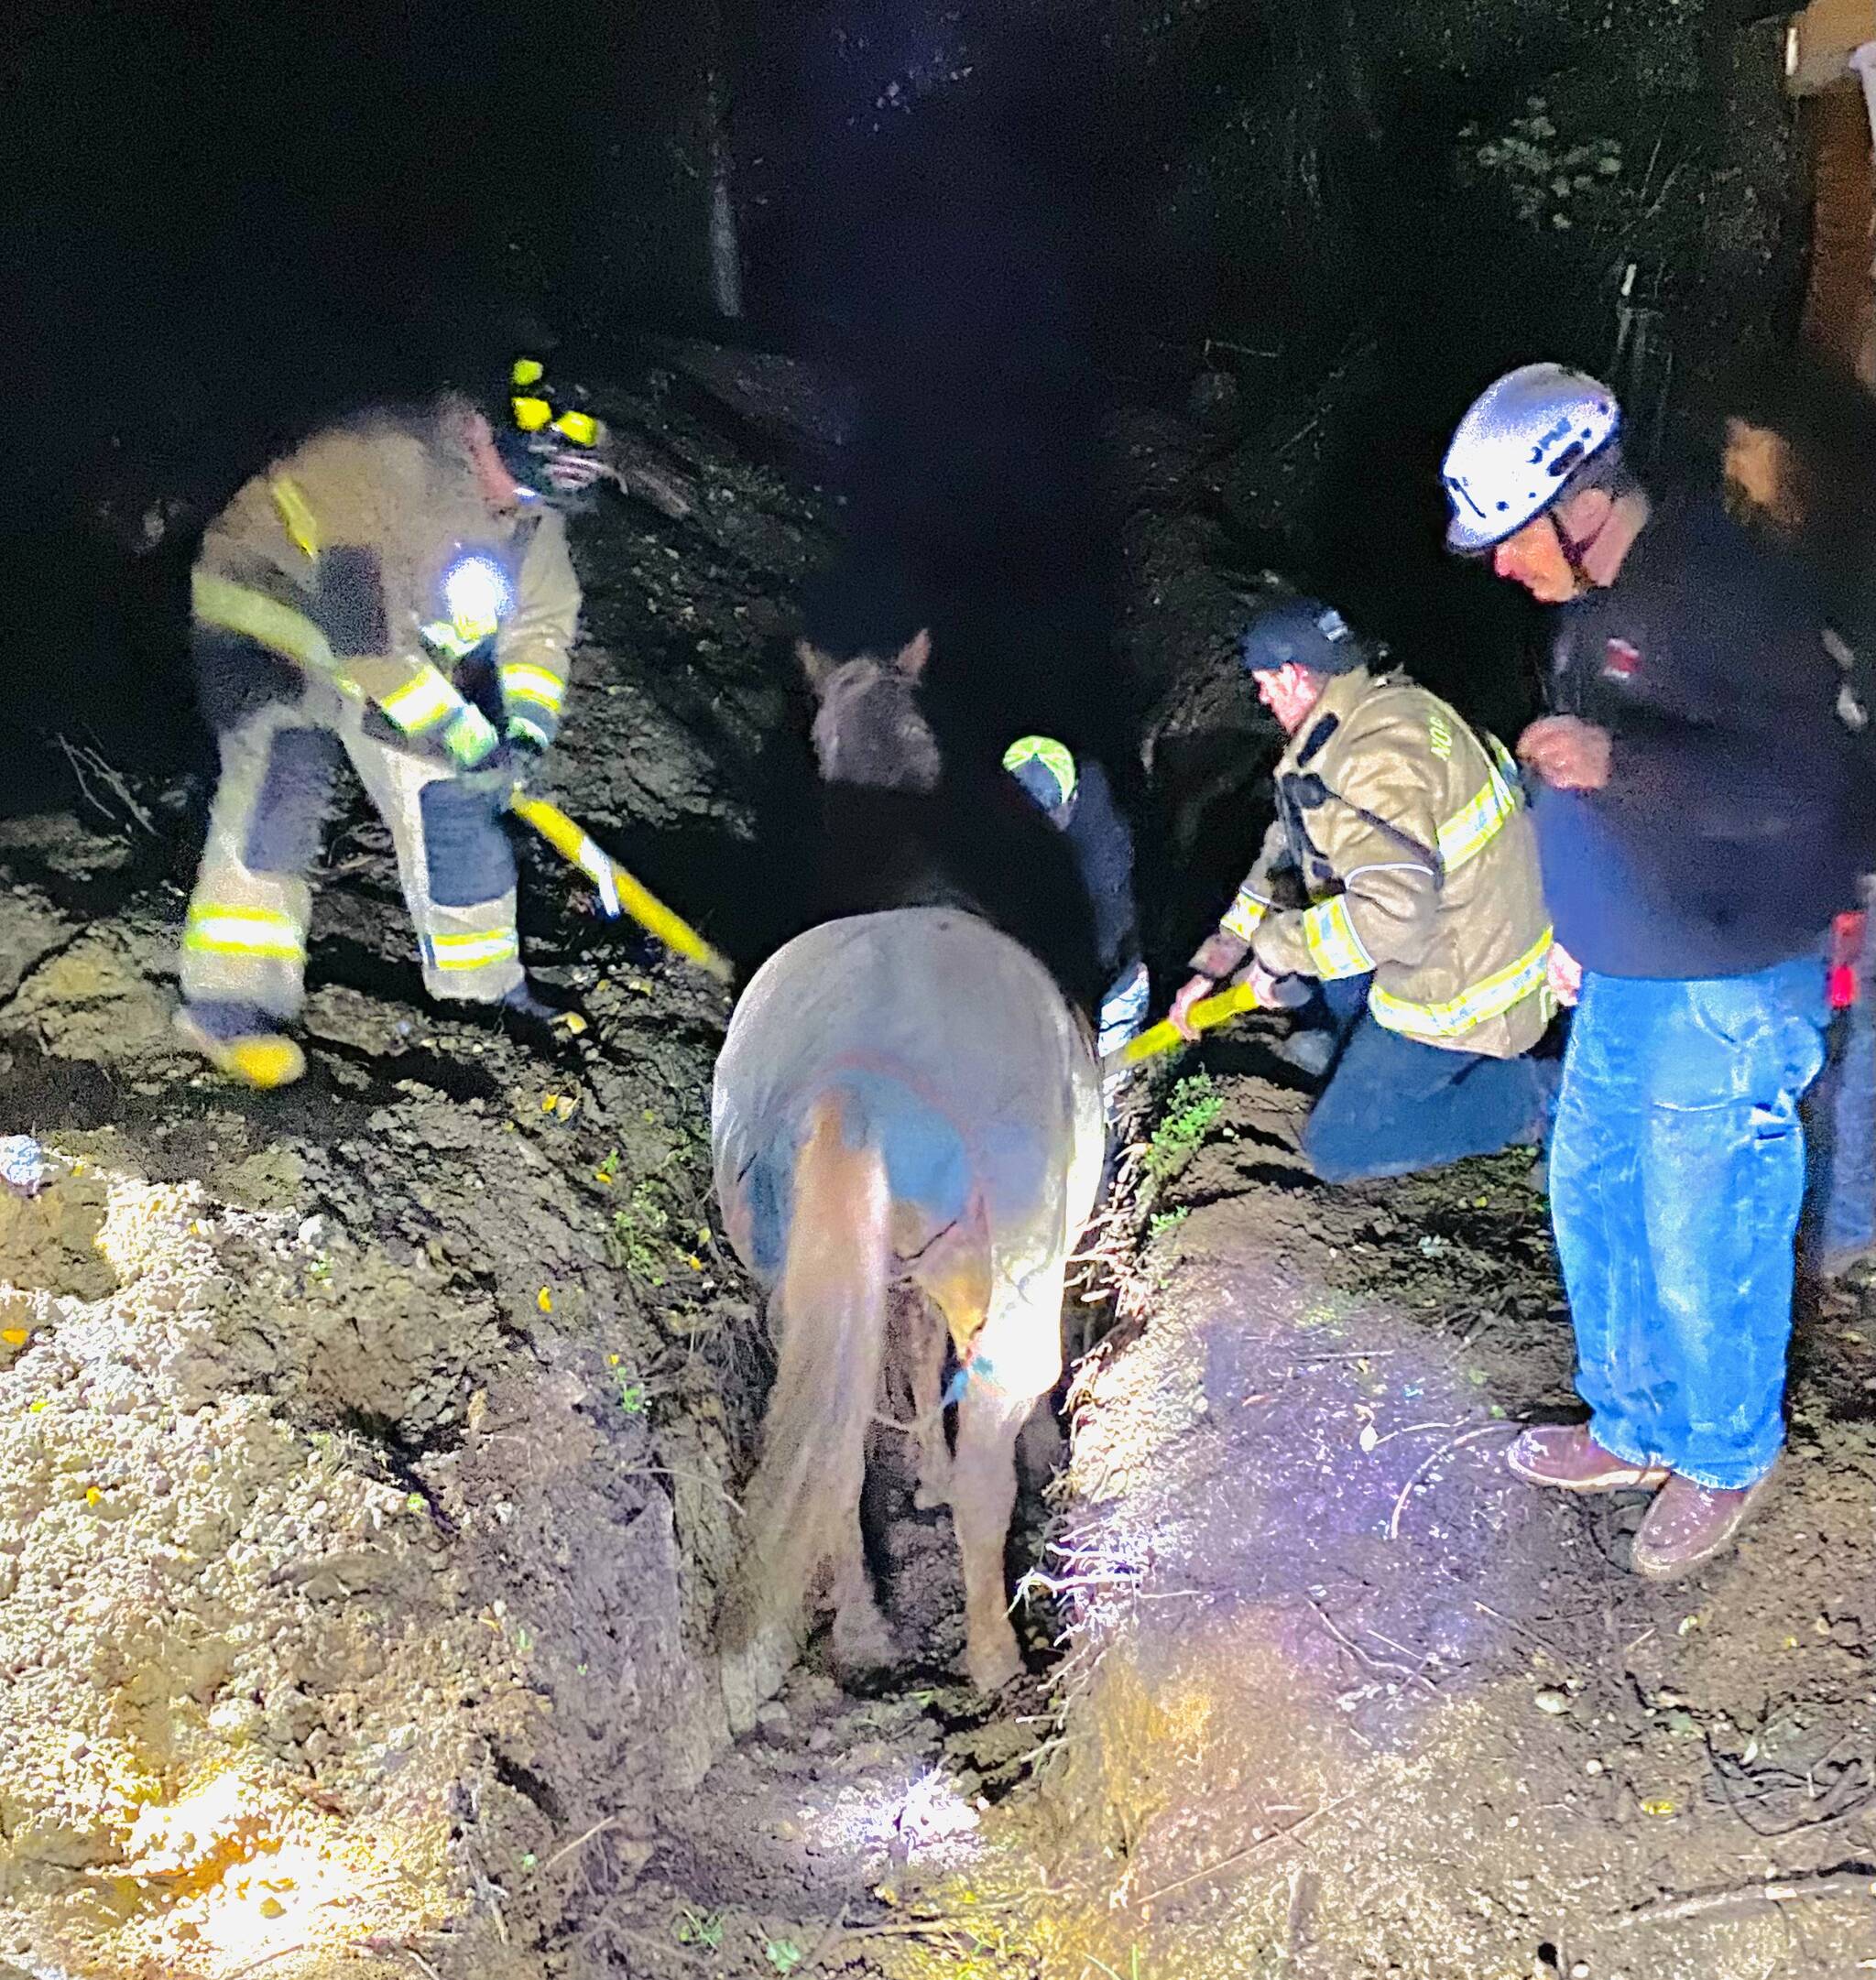 Photo provided
Responders from North Whidbey Fire and Rescue and the Navy rescue 24-year-old Ruby from a trench Nov. 11.